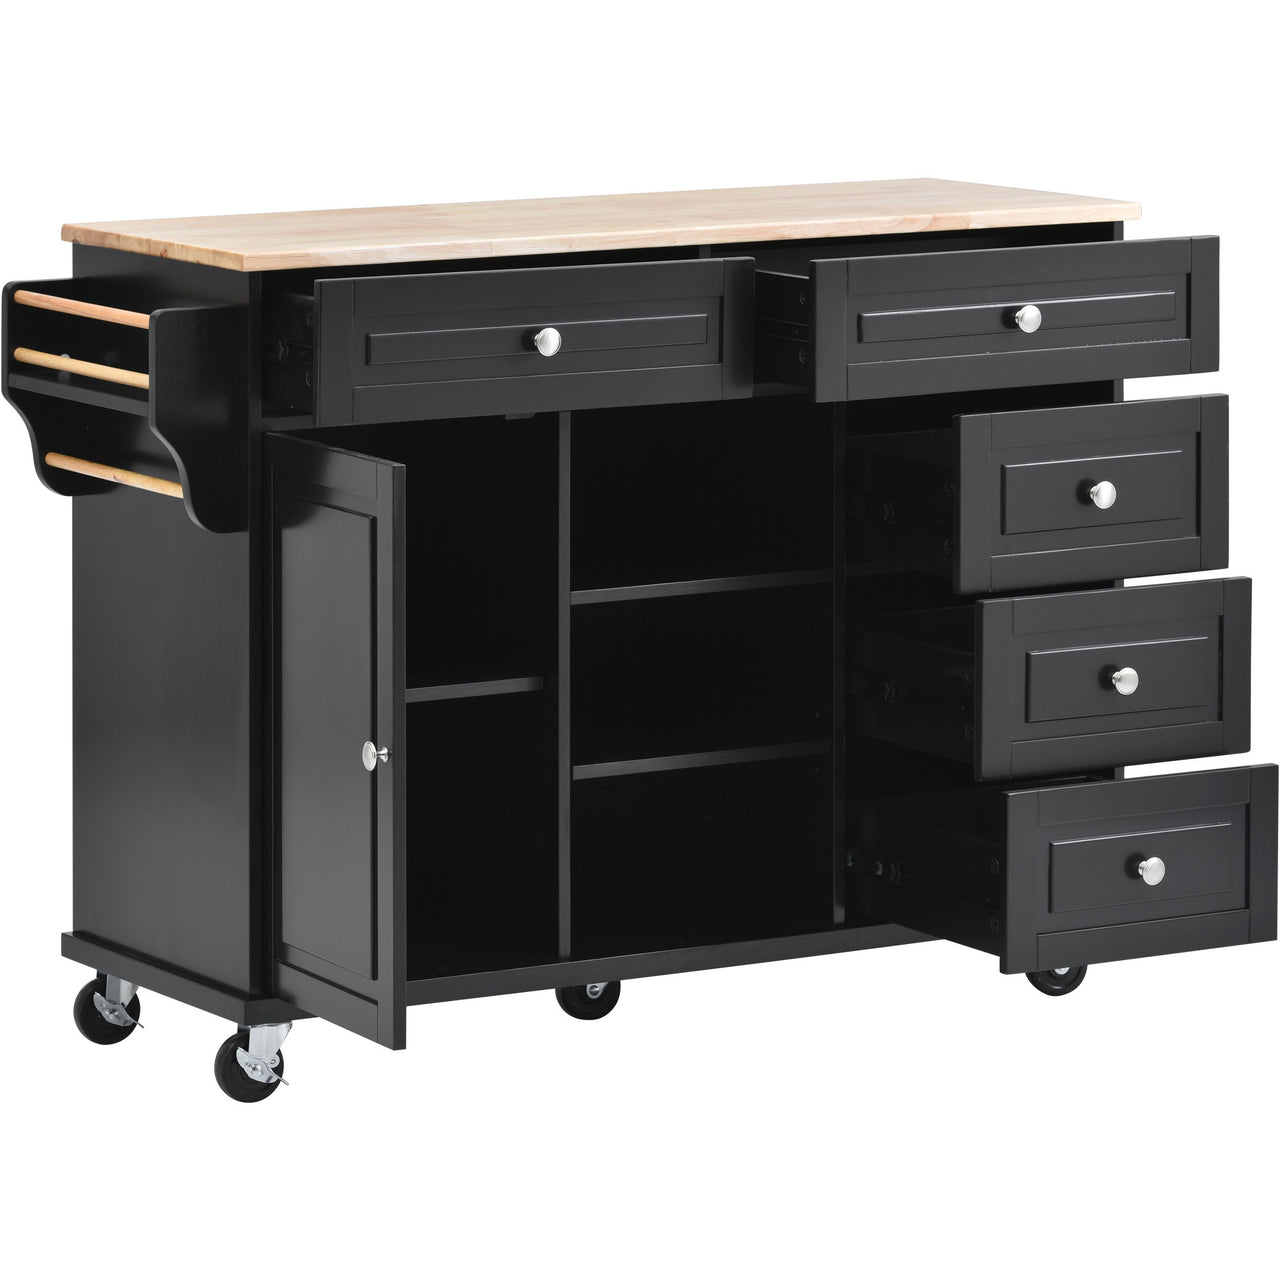 Kitchen cart with Rubber wood desktop rolling mobile kitchen island with storage and 5 draws 53 Inch length (Black)